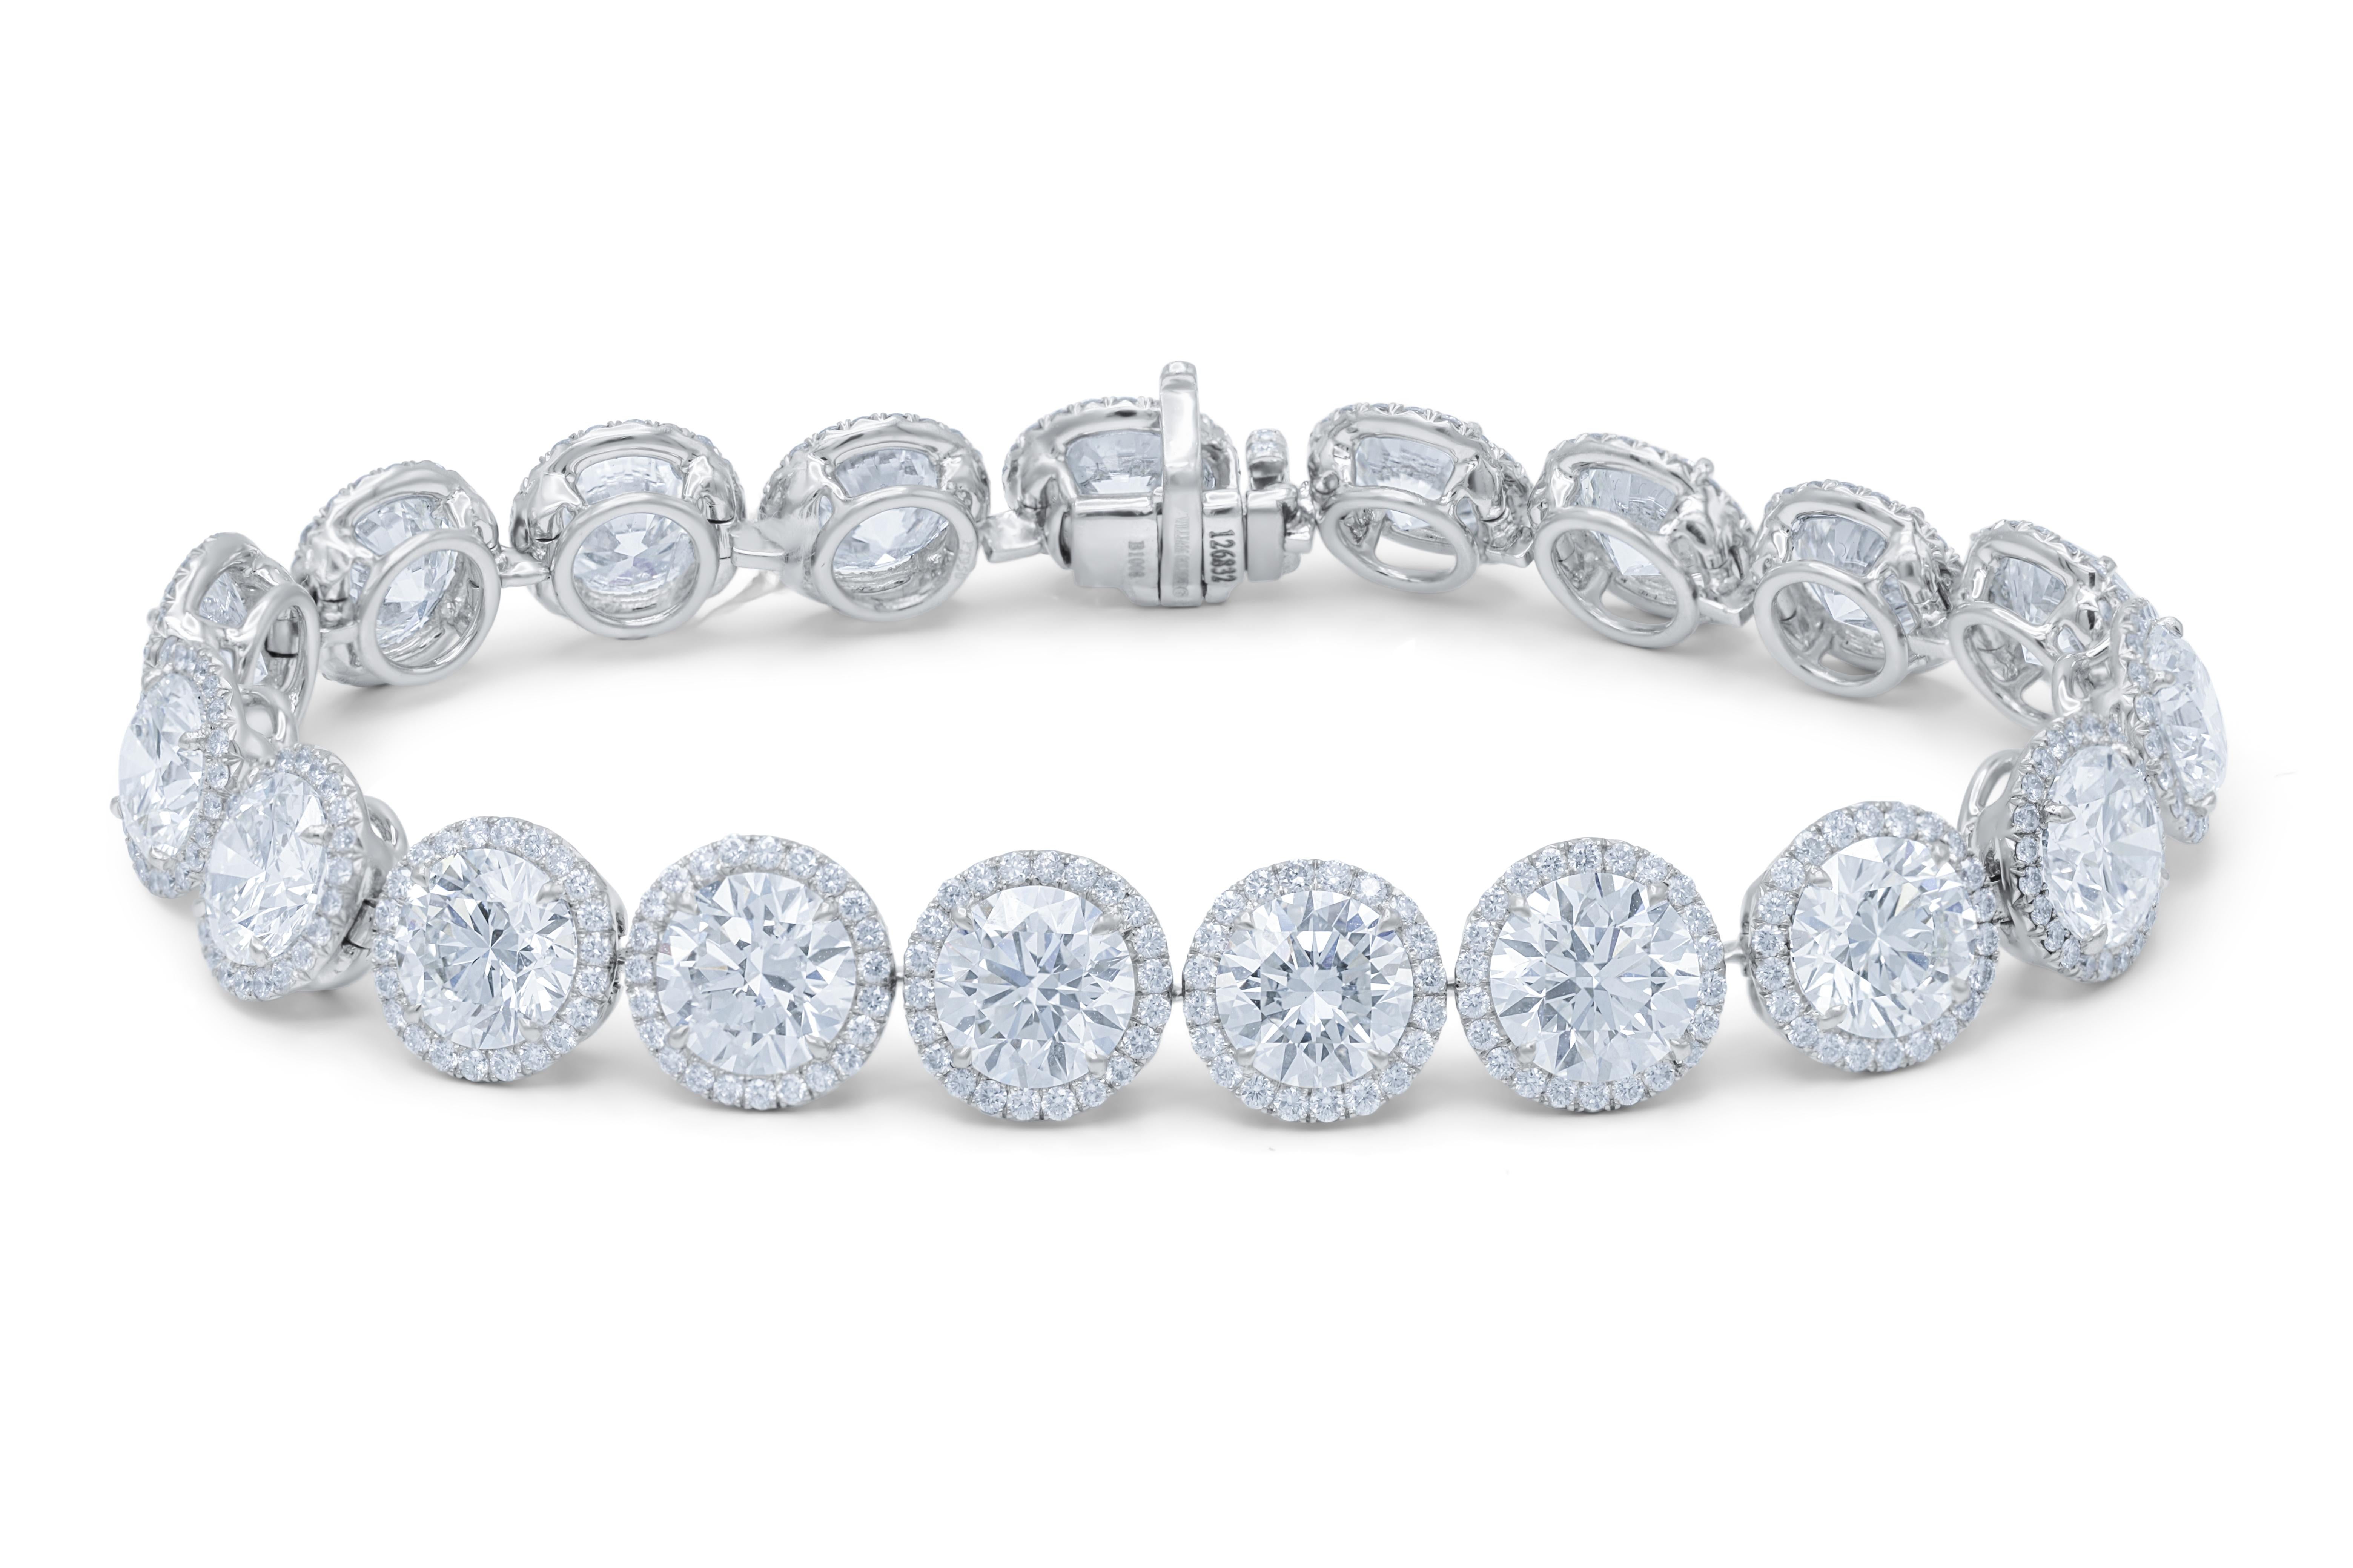 Platinum diamond bracelet featuring 19.76 cts of round diamonds surrounded by 2.16 cts round diamonds creating a halo design (GH) Color, VVS-VS-Clarity, GIA Certified)
Diana M. is a leading supplier of top-quality fine jewelry for over 35